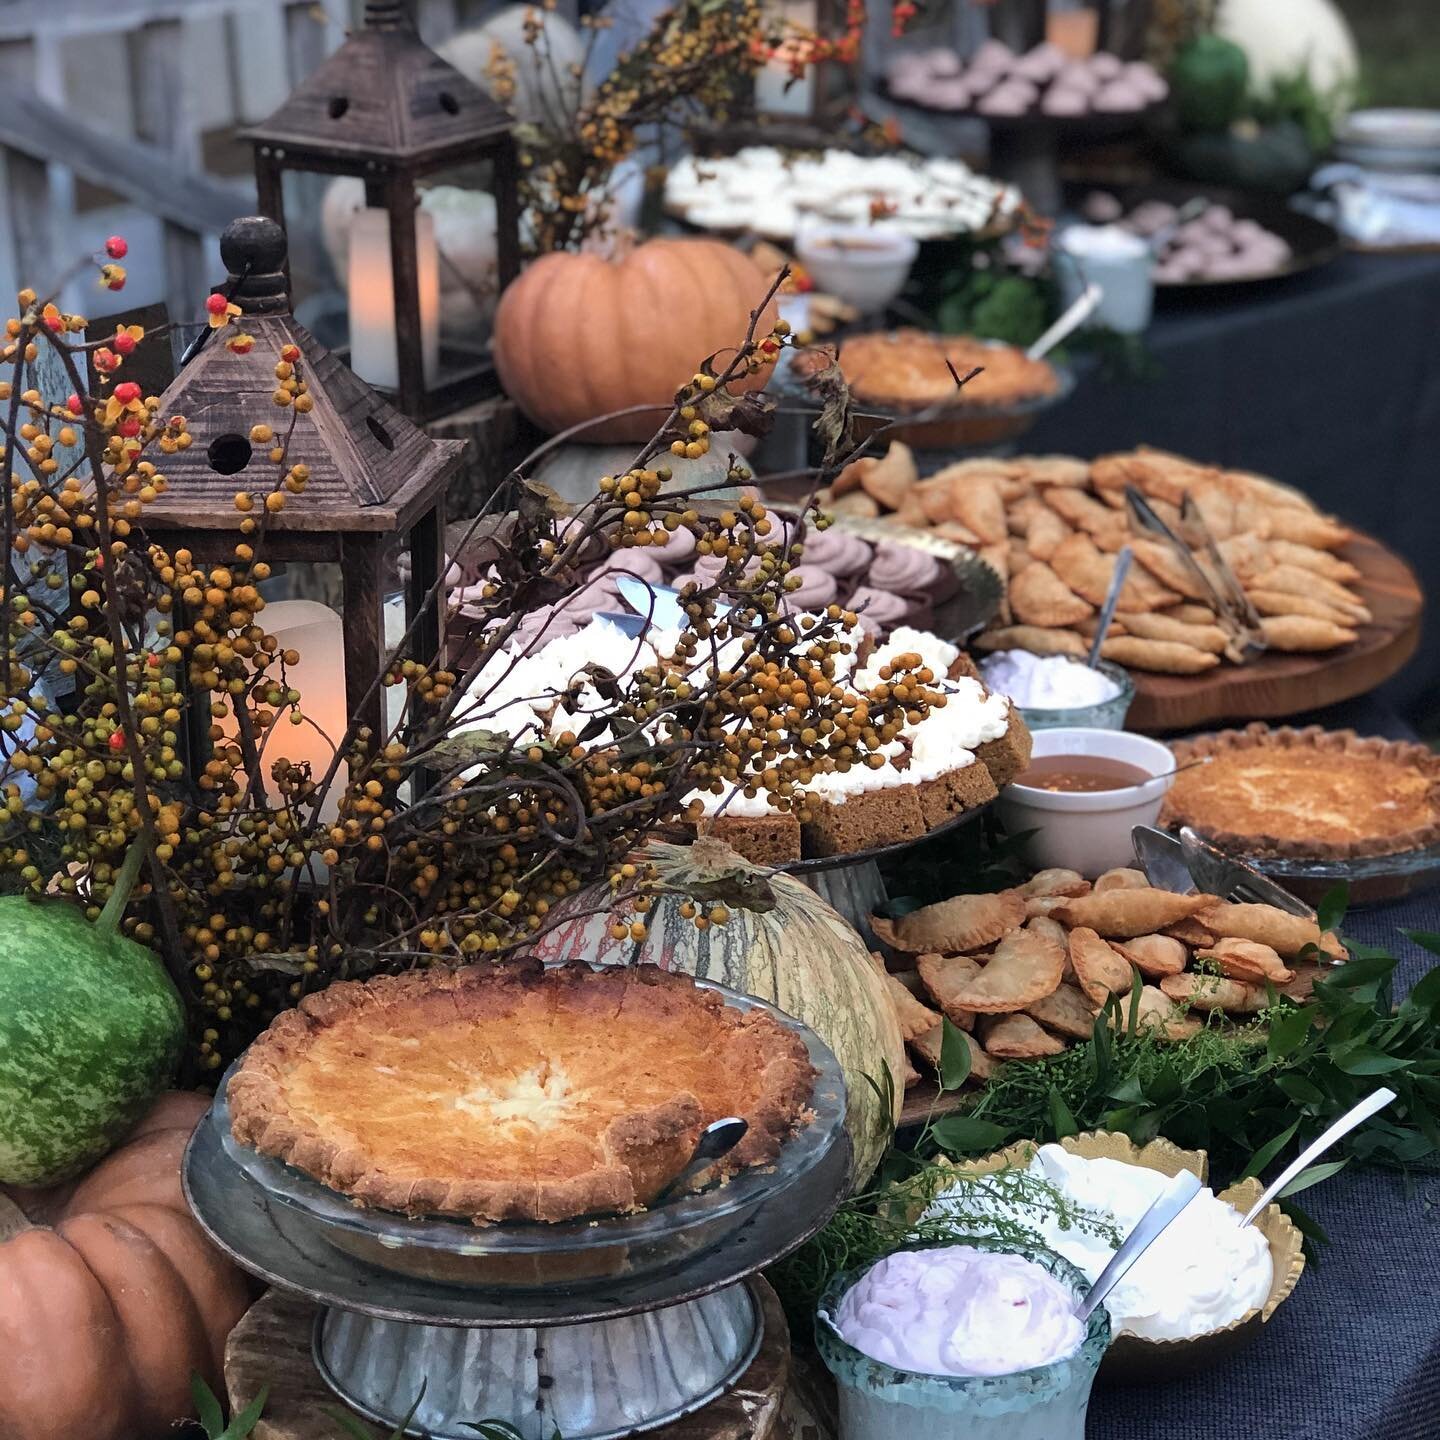 Who&rsquo;s ready for Fall? 🍂 

#falltablescape #fallwedding #autumn #harvest #harvestsupper #weddingseason #fallweddingseason #fallbride #mississippicaterer #oxfordms